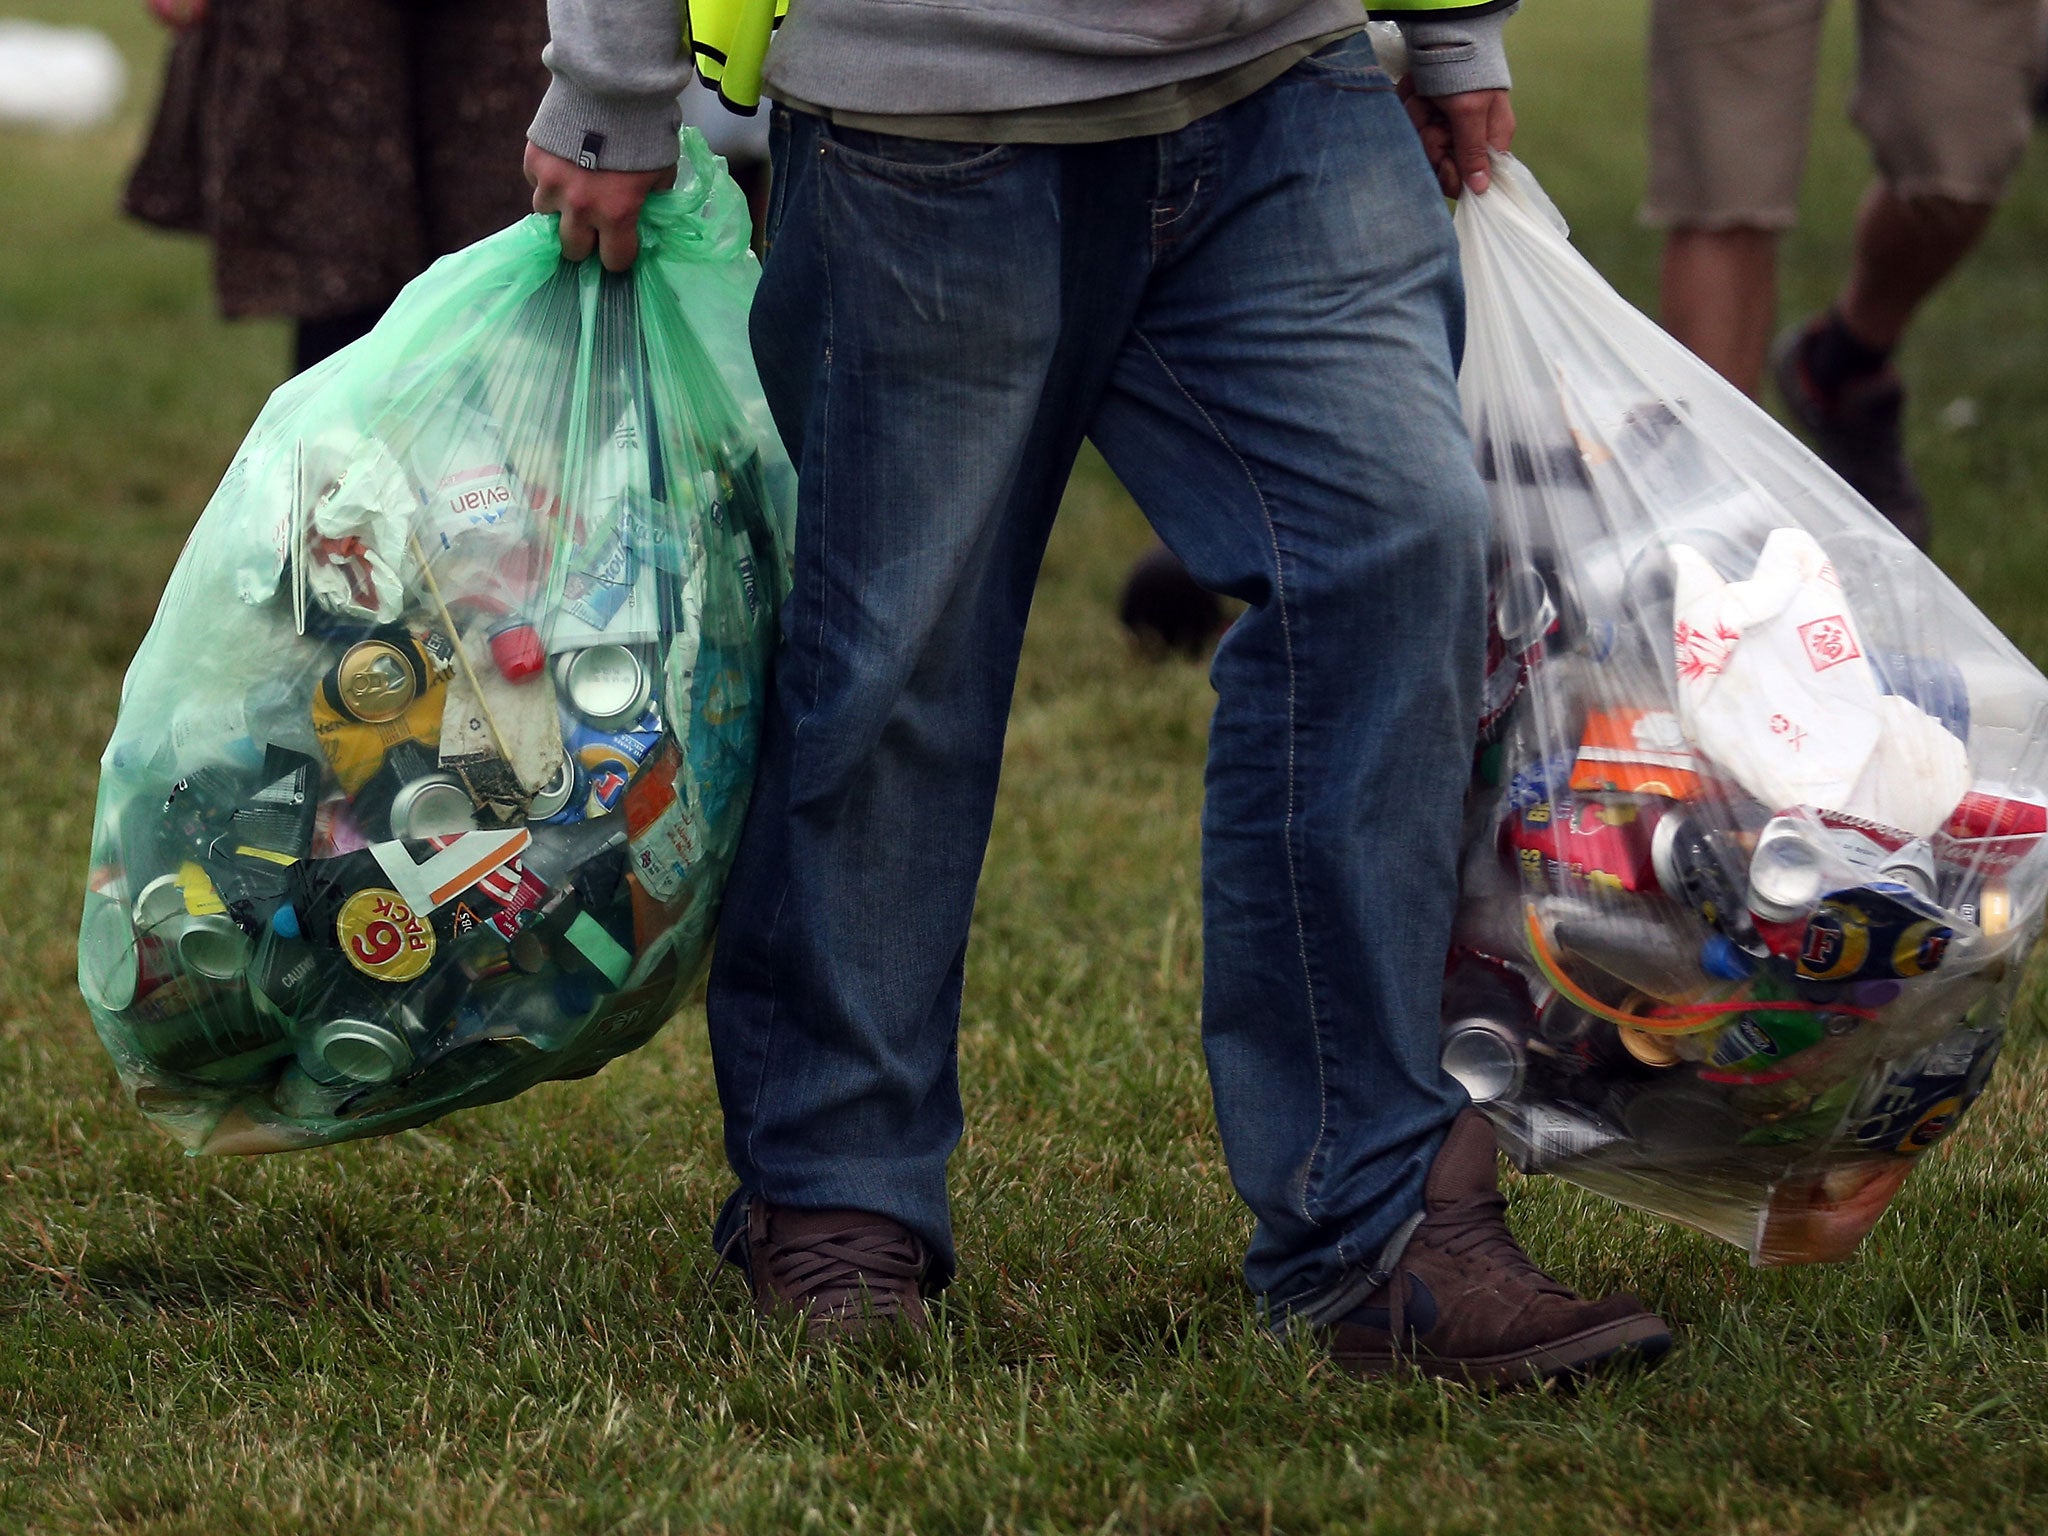 Local councils want to crack down on people who throw litter from cars